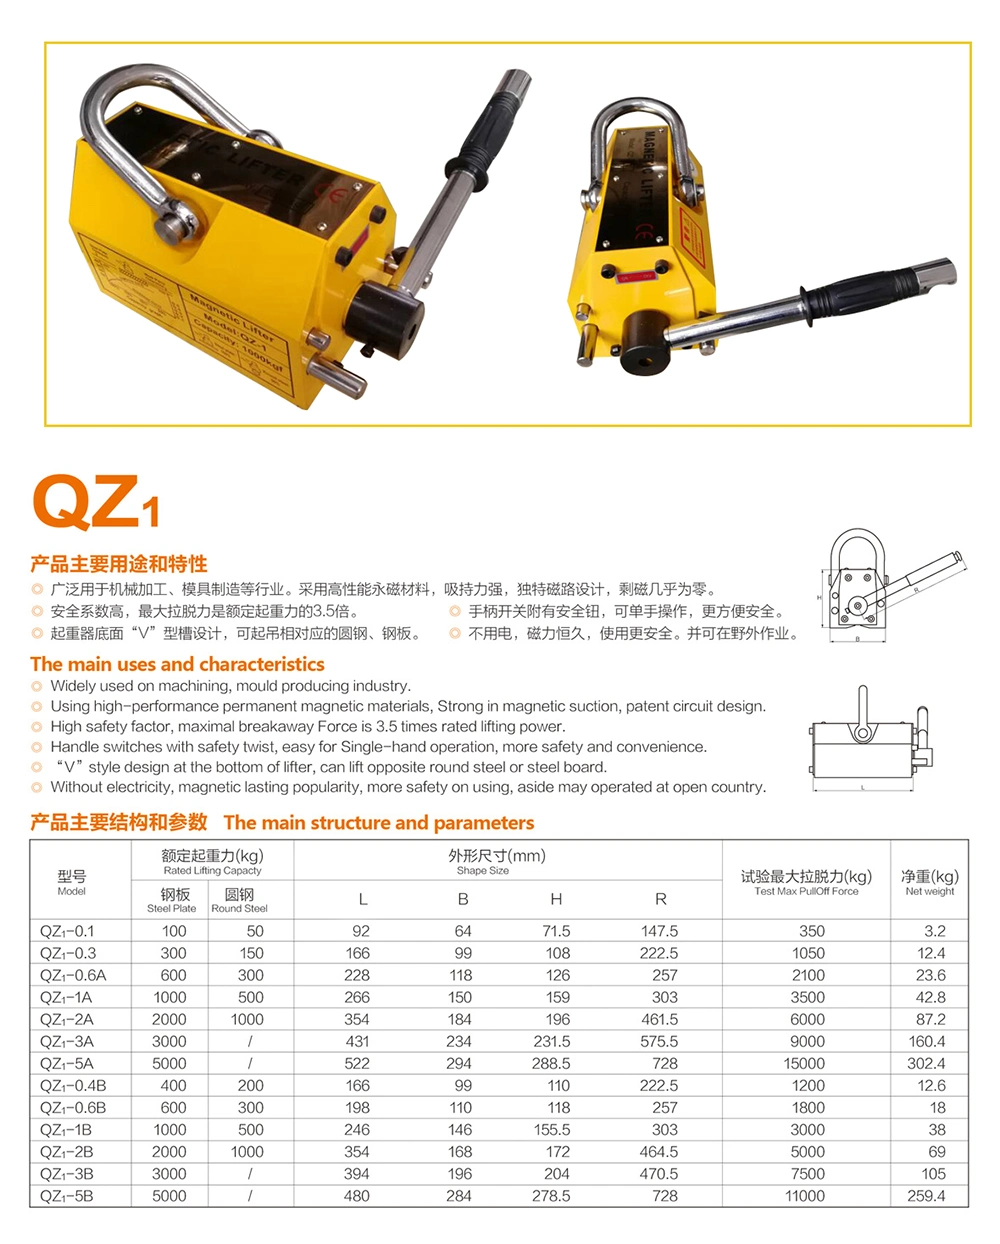 Lifter Magnetic Lifter Permanent Magnet Lifter 2000kg Manual Permanent Magnet Lifter for Steel Plate Magnetic Lifting